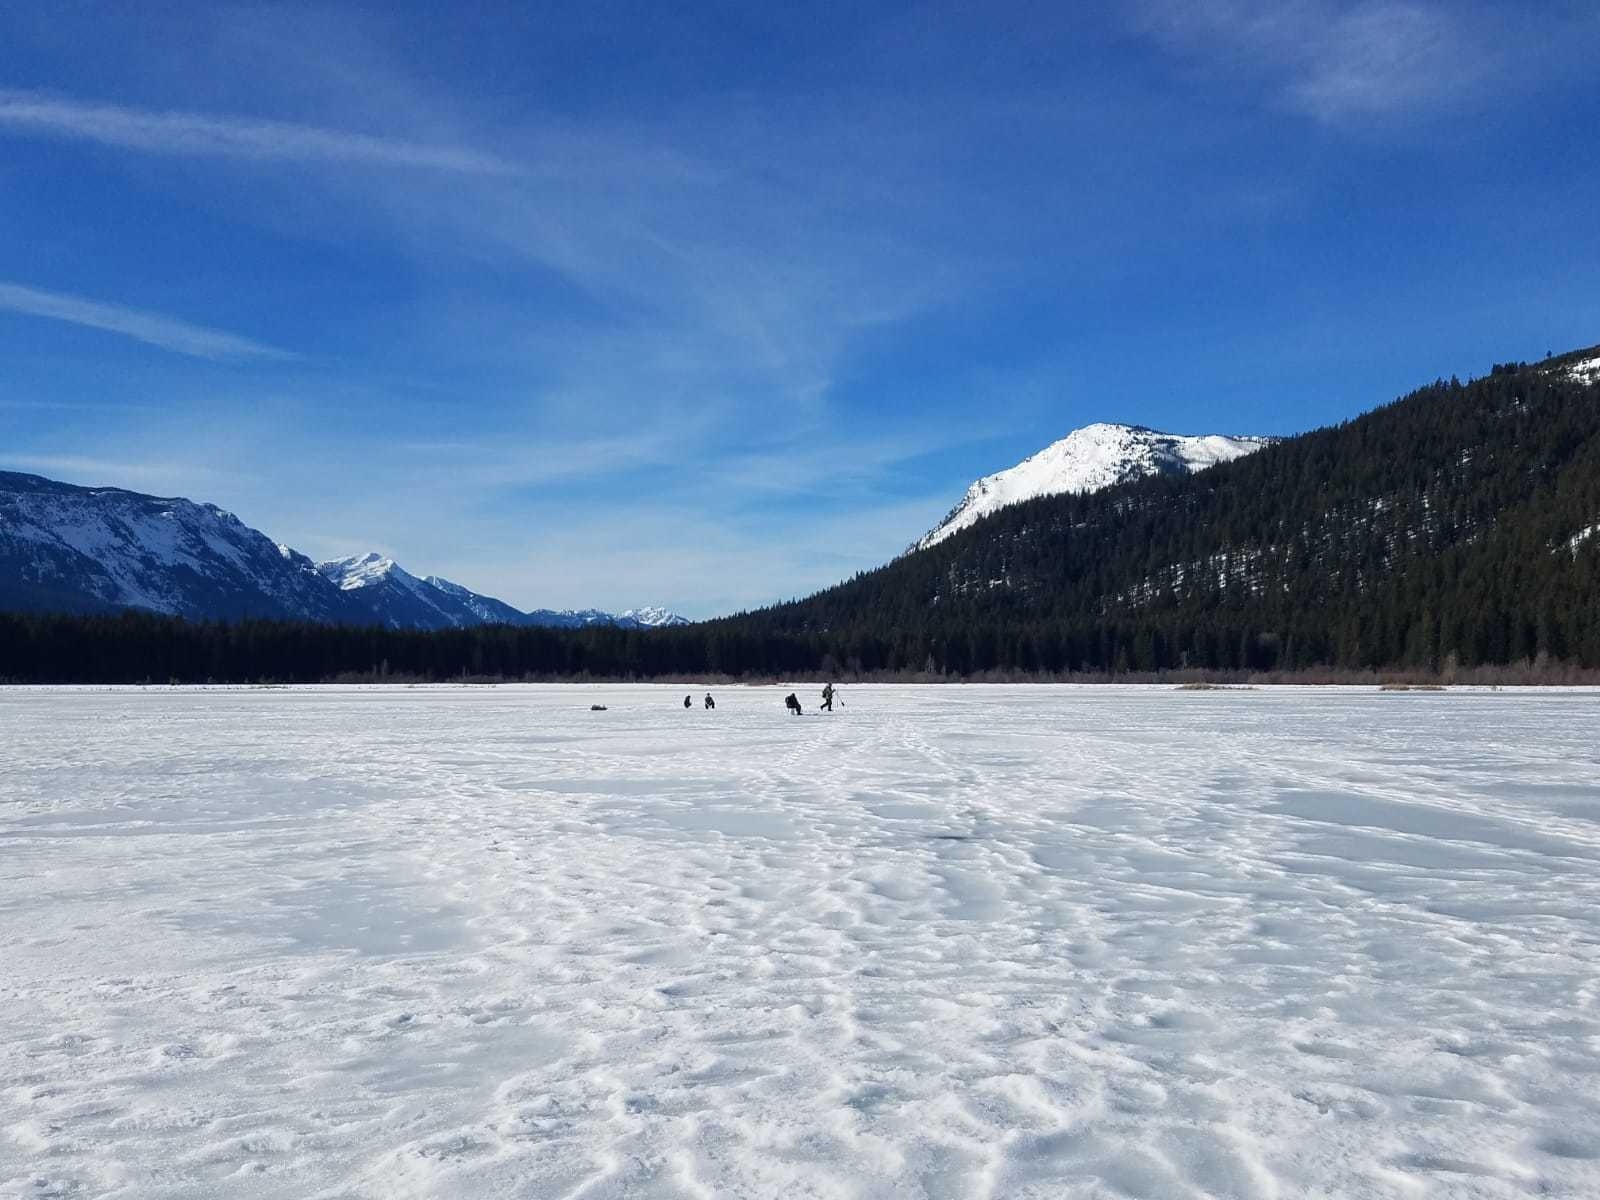 Ice fishing! I've never seen this IRL before and was totally surprised it was in Washington. Always thought it was an upper Midwest thing. Super cool :)